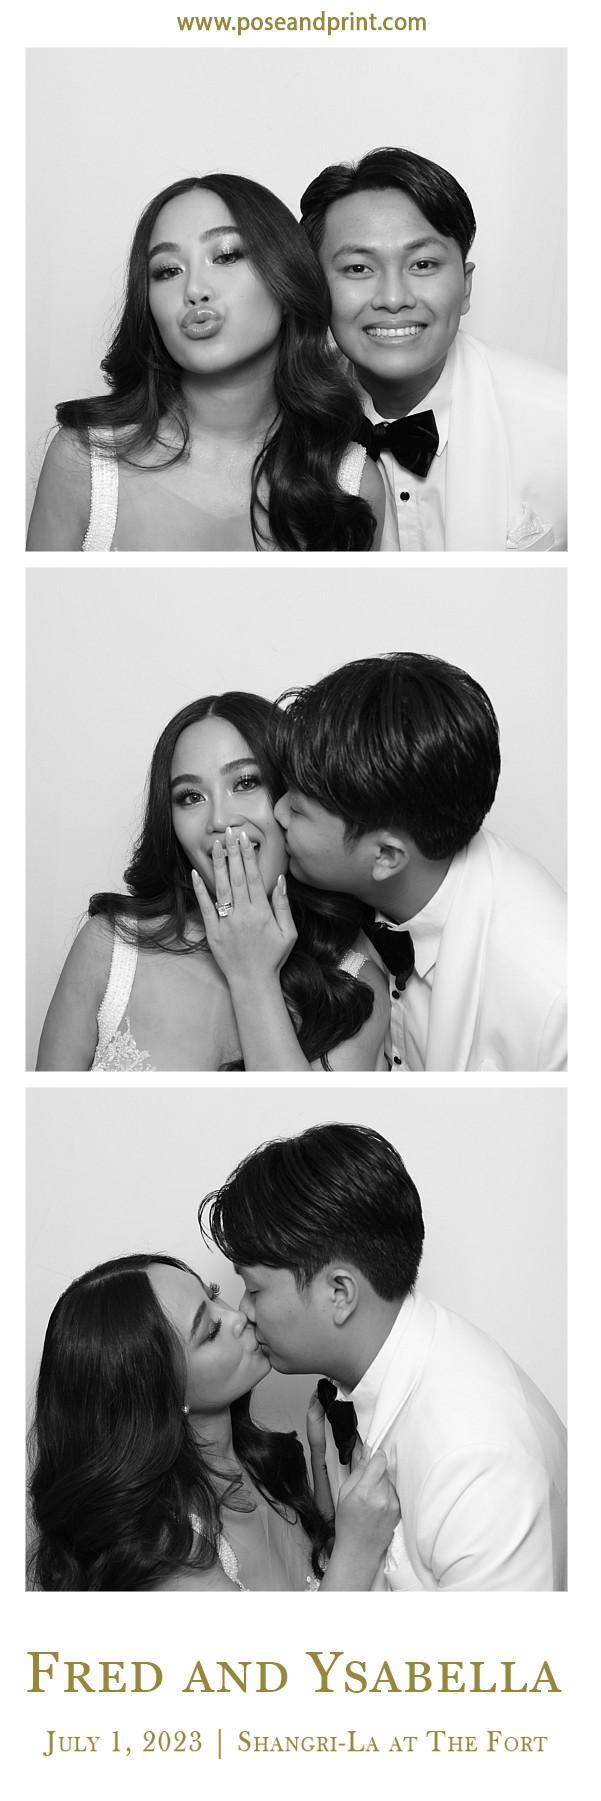 Fred and Ysabella’s Wedding – Vintage Booth